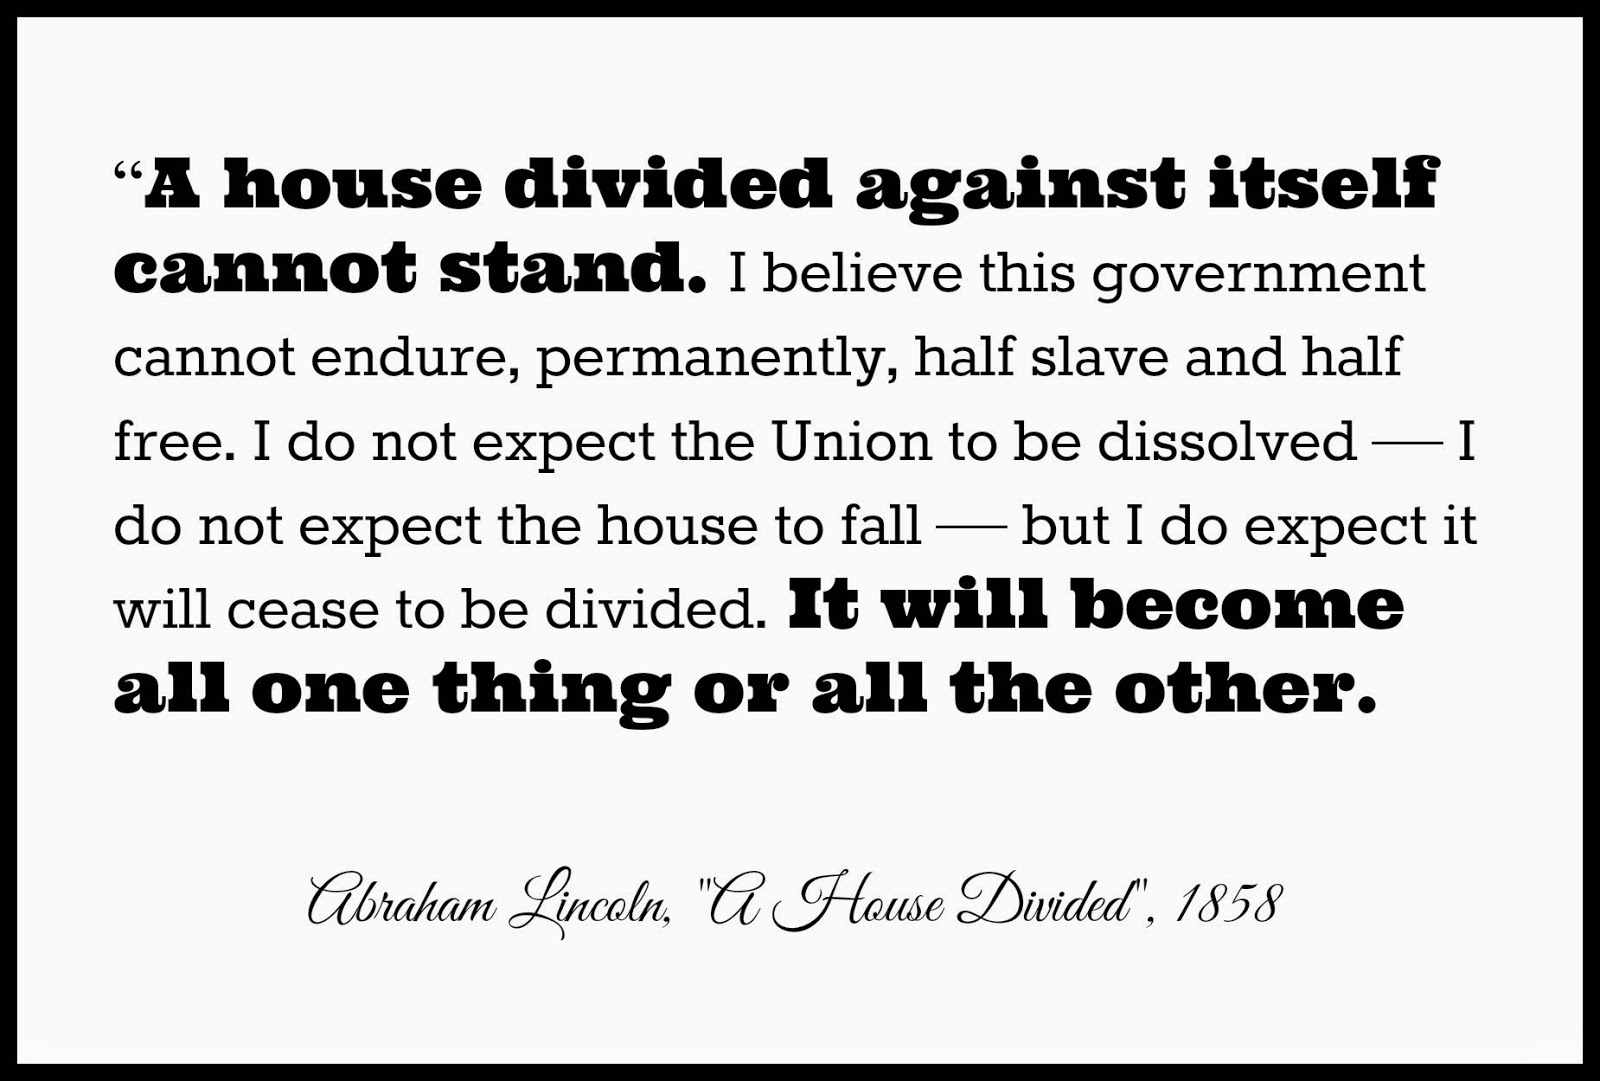 A house divided against itself cannot stand.